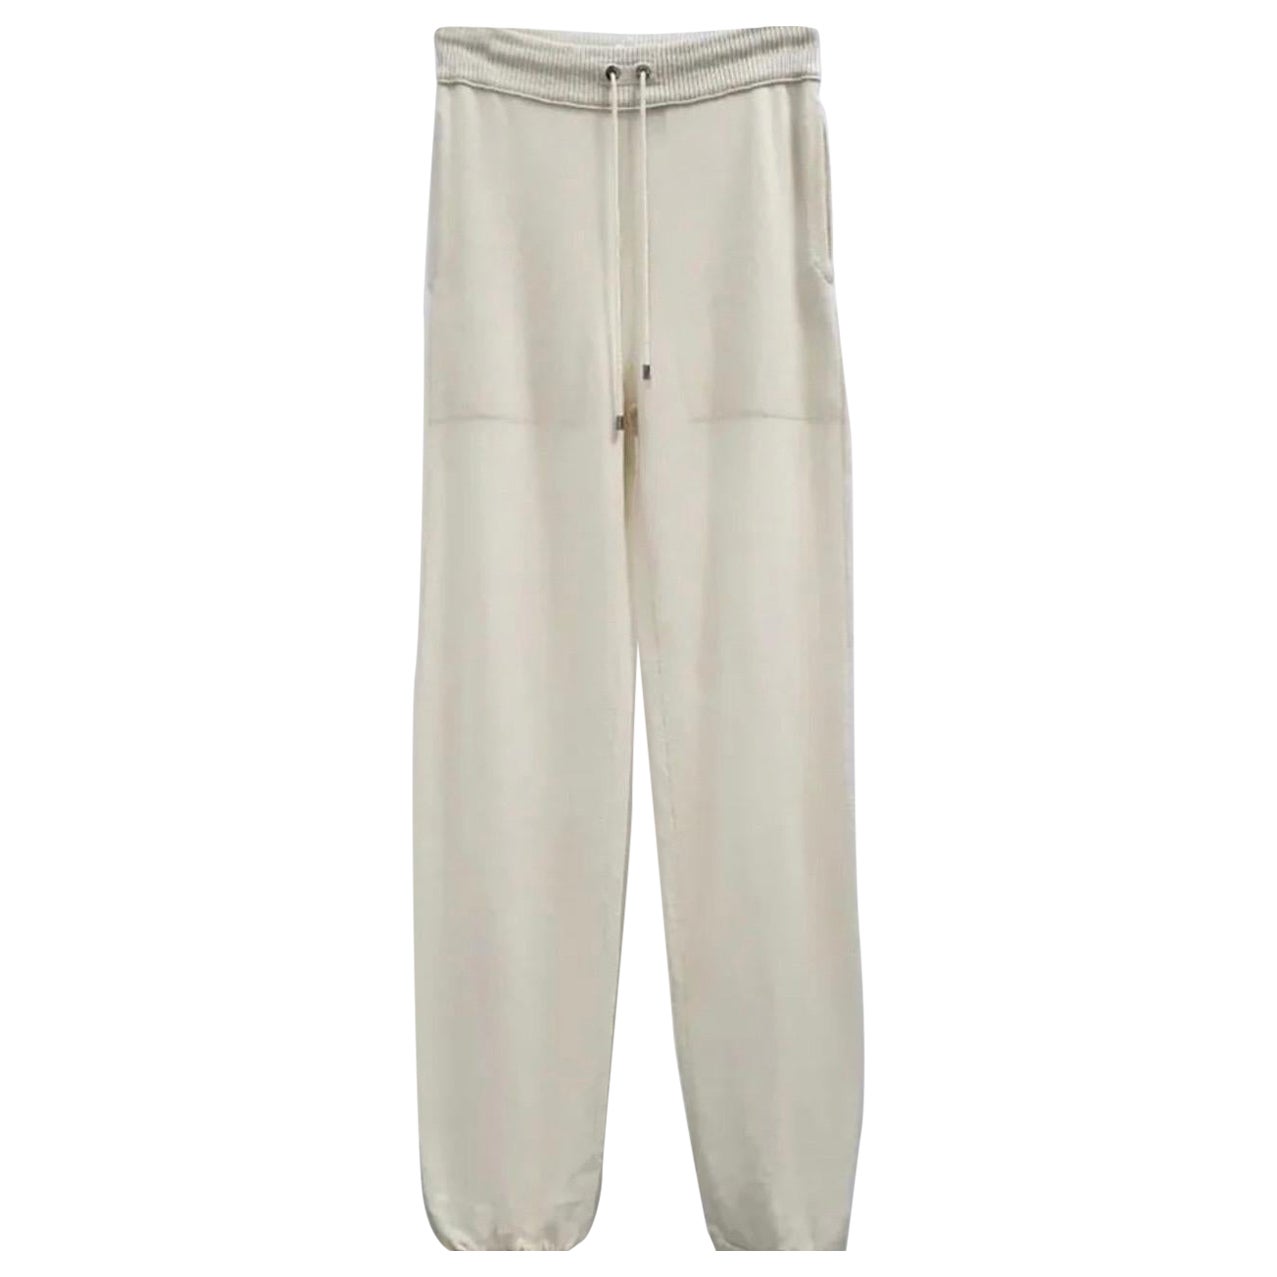 Chanel Ivory Cashmere Pants Trousers